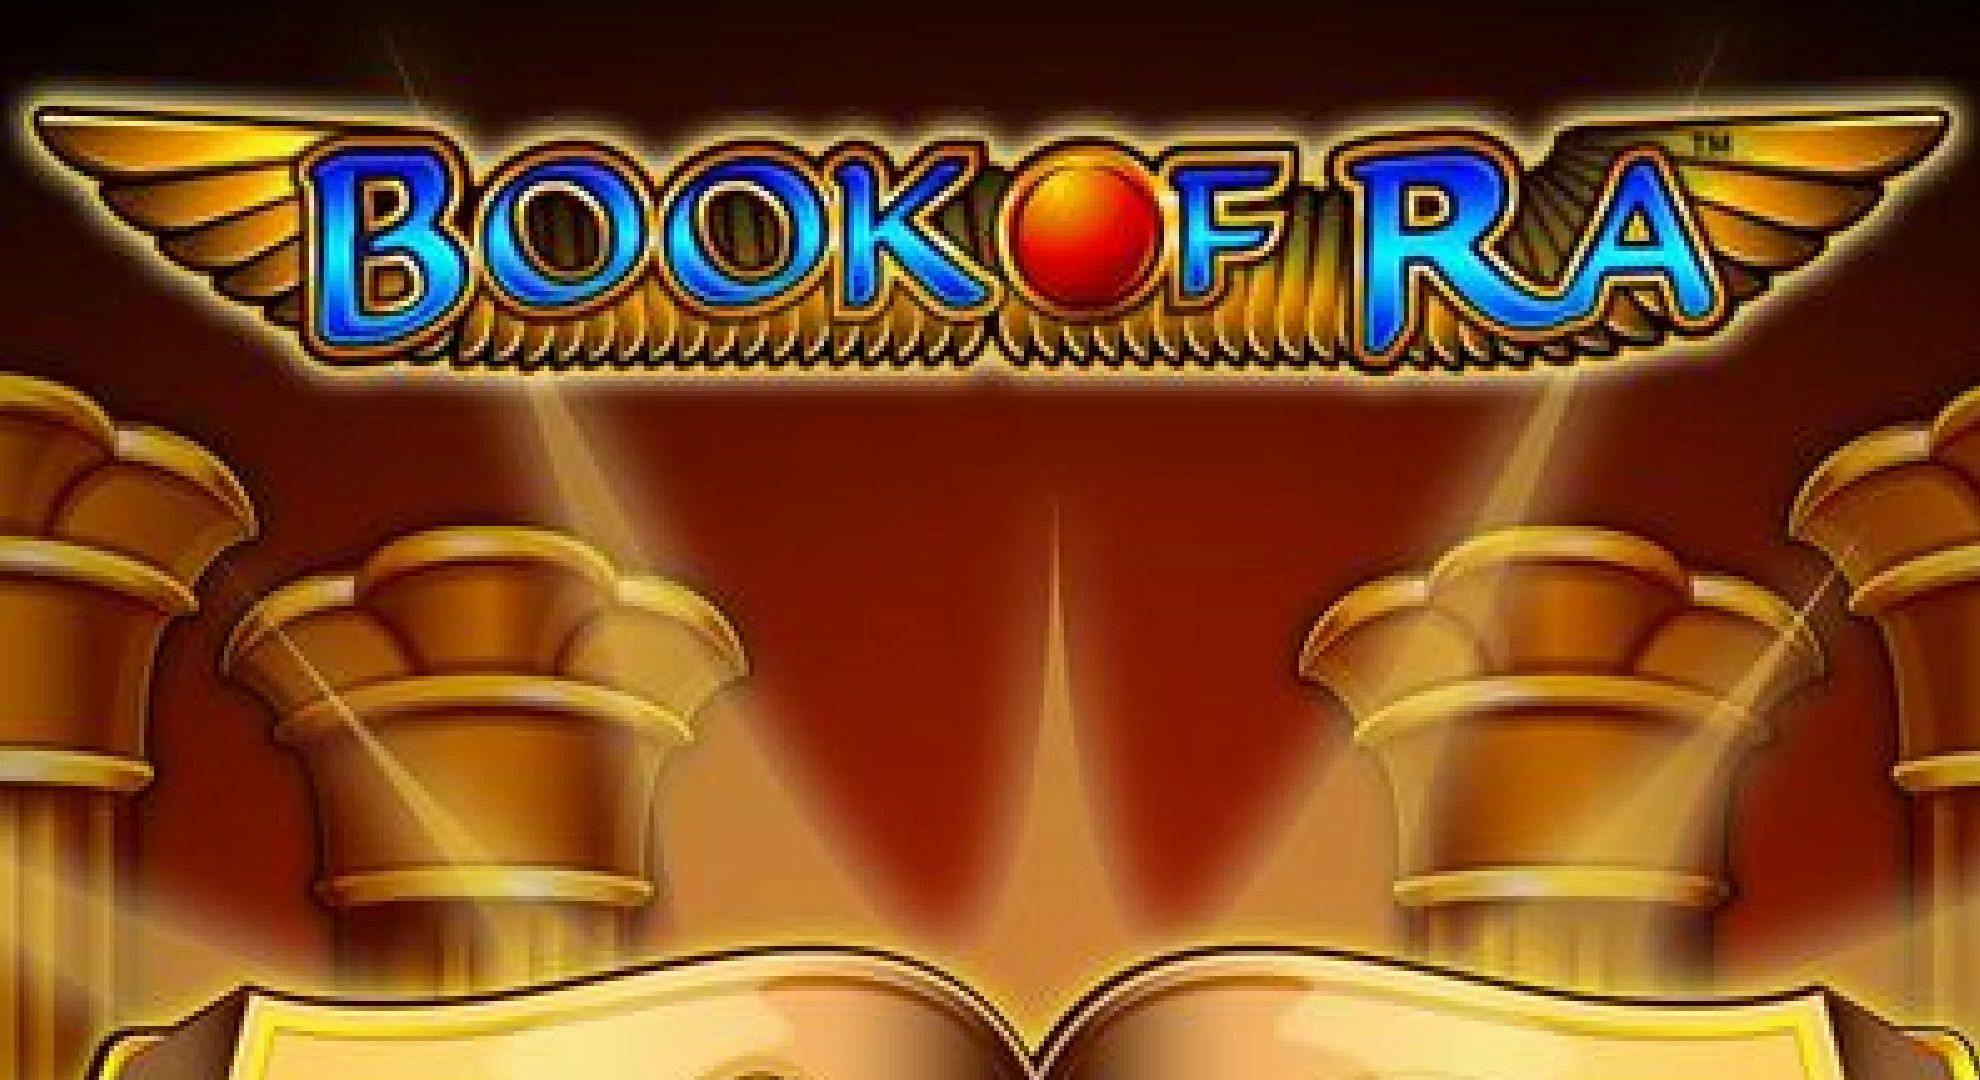 Book Of Ra Classic Slot Online Free Play